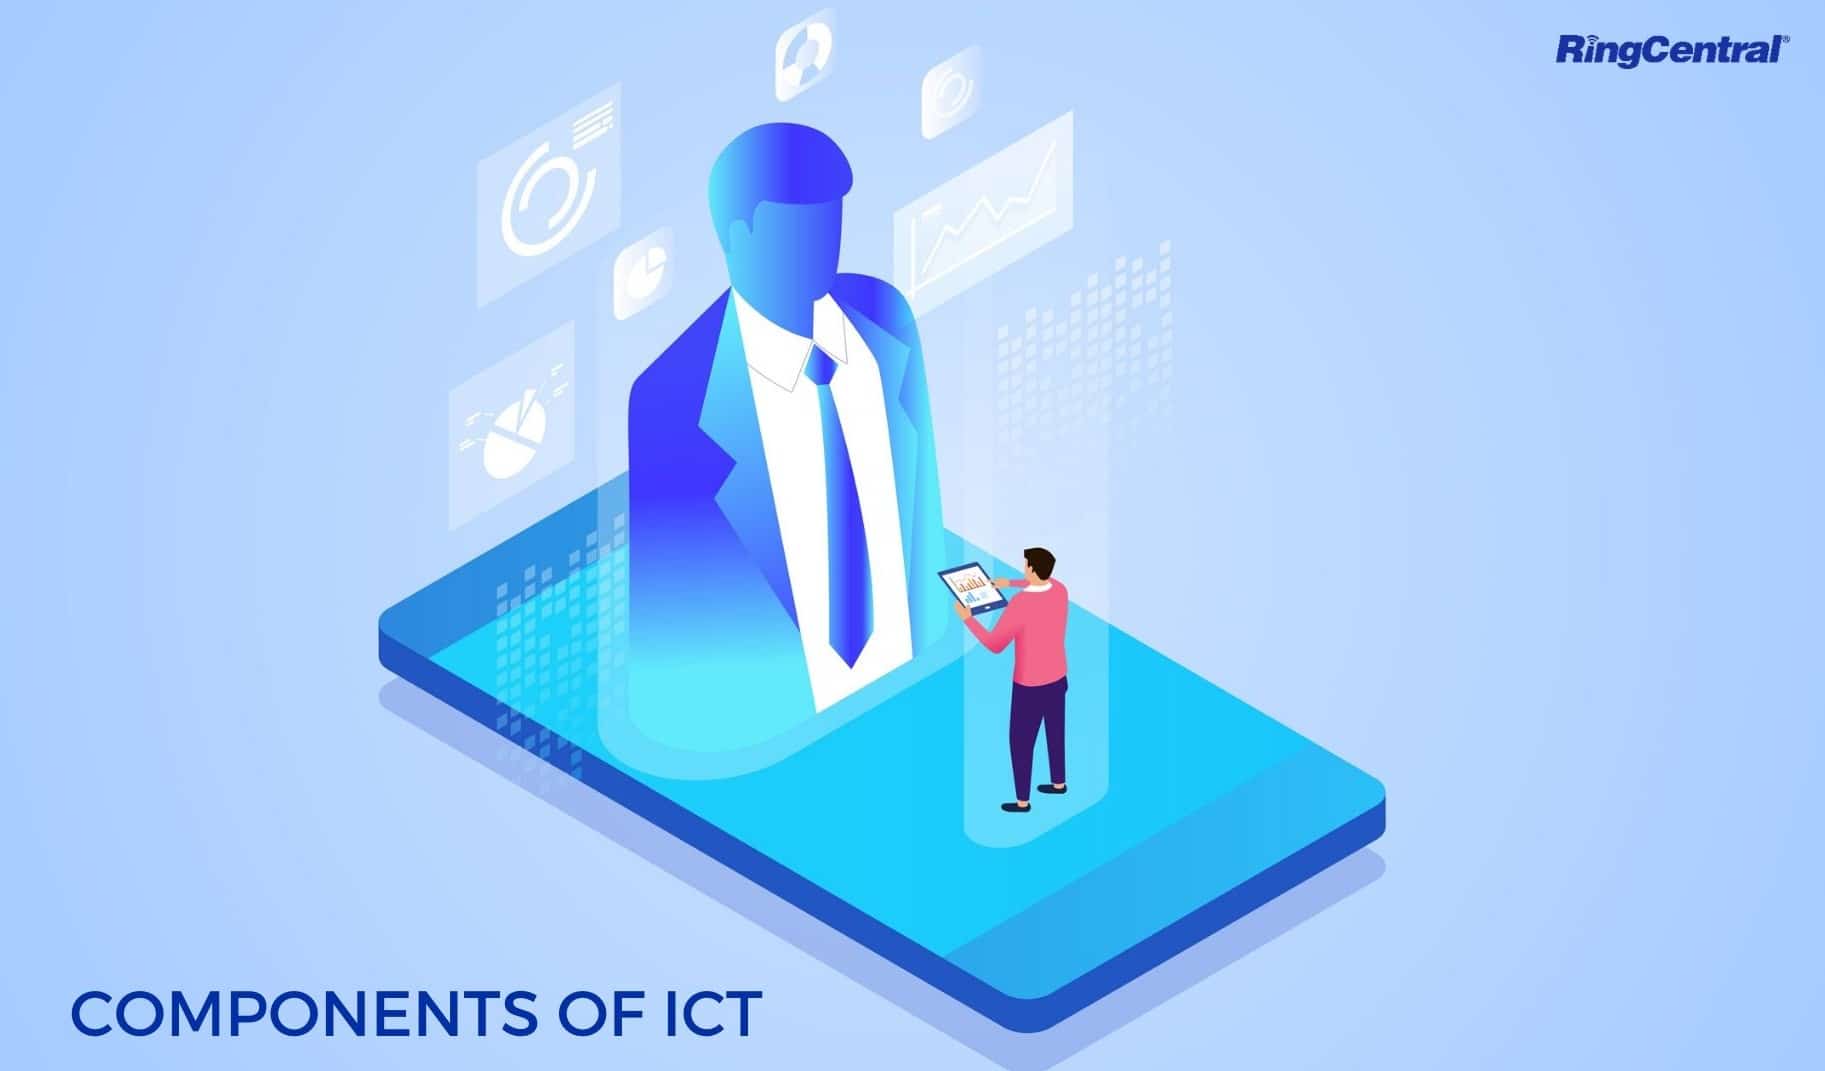 Components of ICT